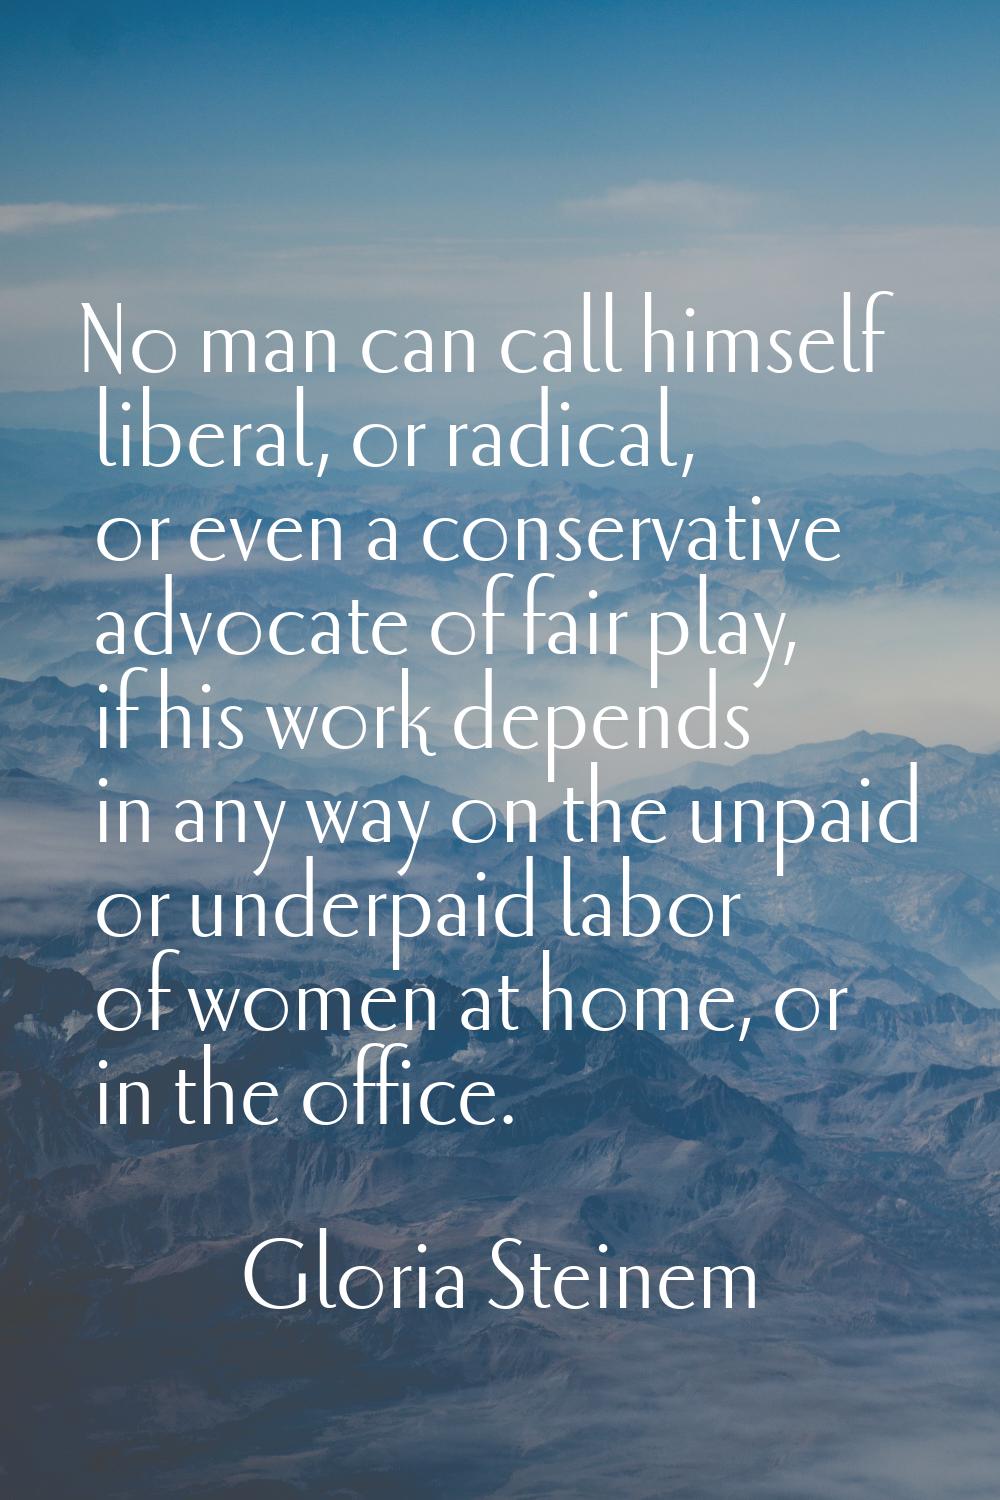 No man can call himself liberal, or radical, or even a conservative advocate of fair play, if his w